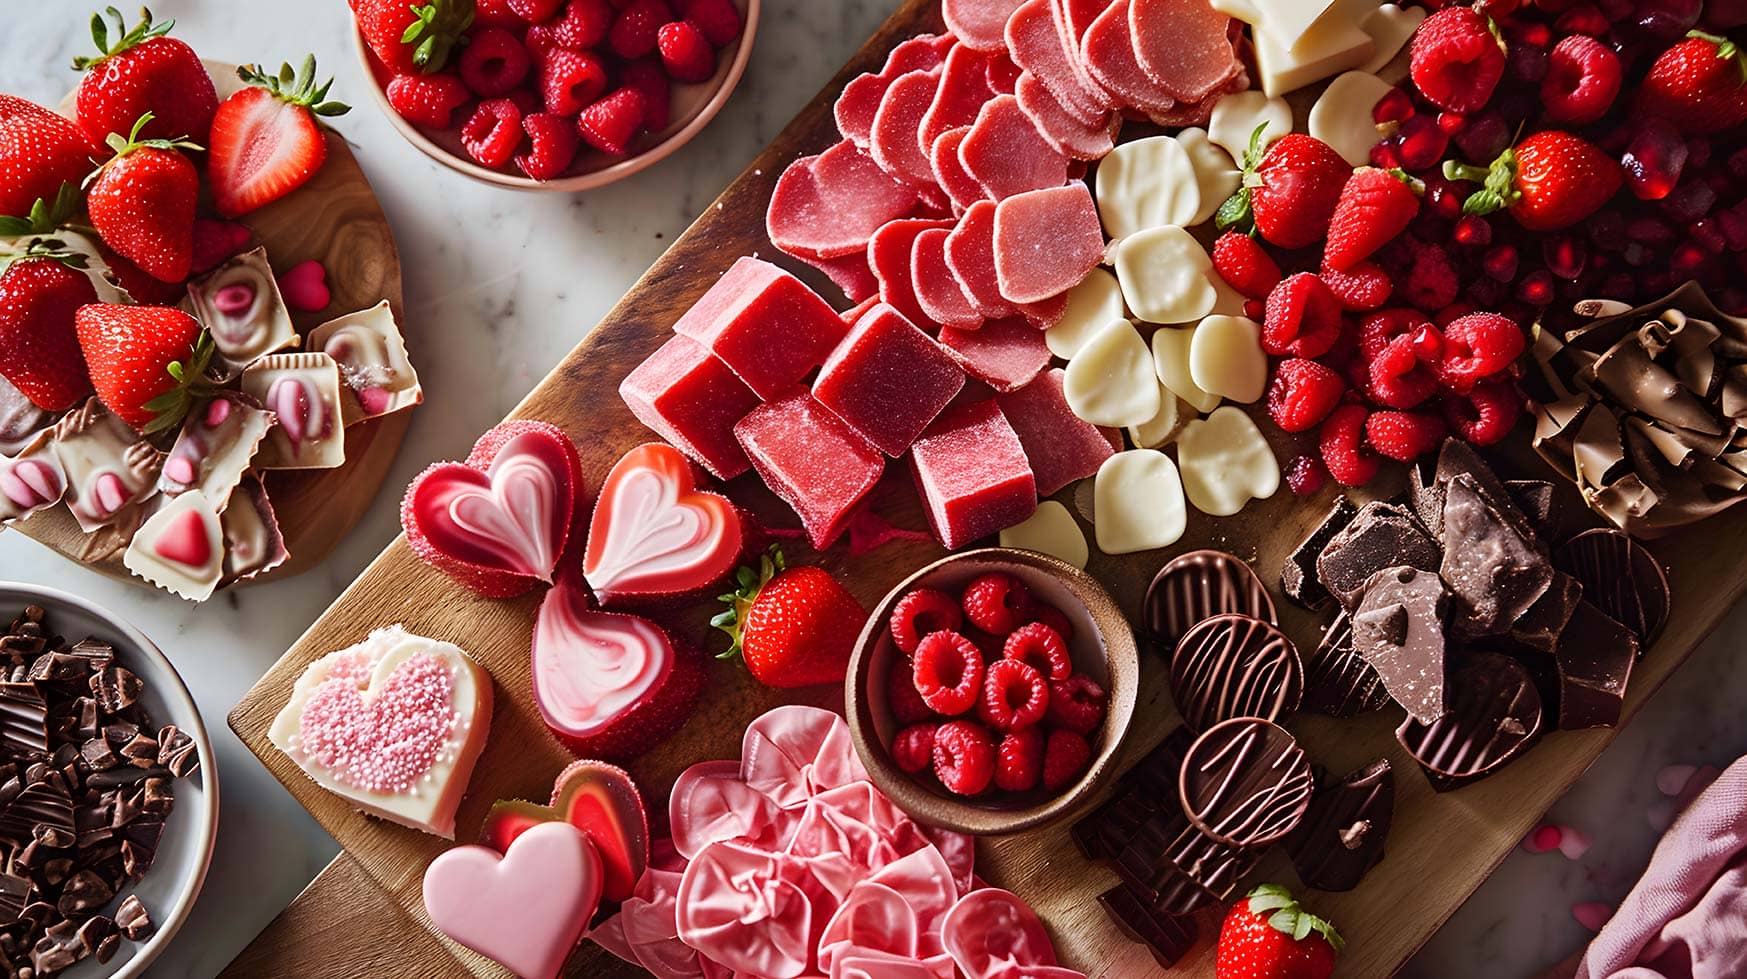 Personalized Valentine's Day charcuterie board with an array of delightful treats, including sweets, strawberries, chocolate, and cookies. This thoughtfully crafted board offers a traditional and romantic snacking experience, making it an ideal choice for personalized gifts.